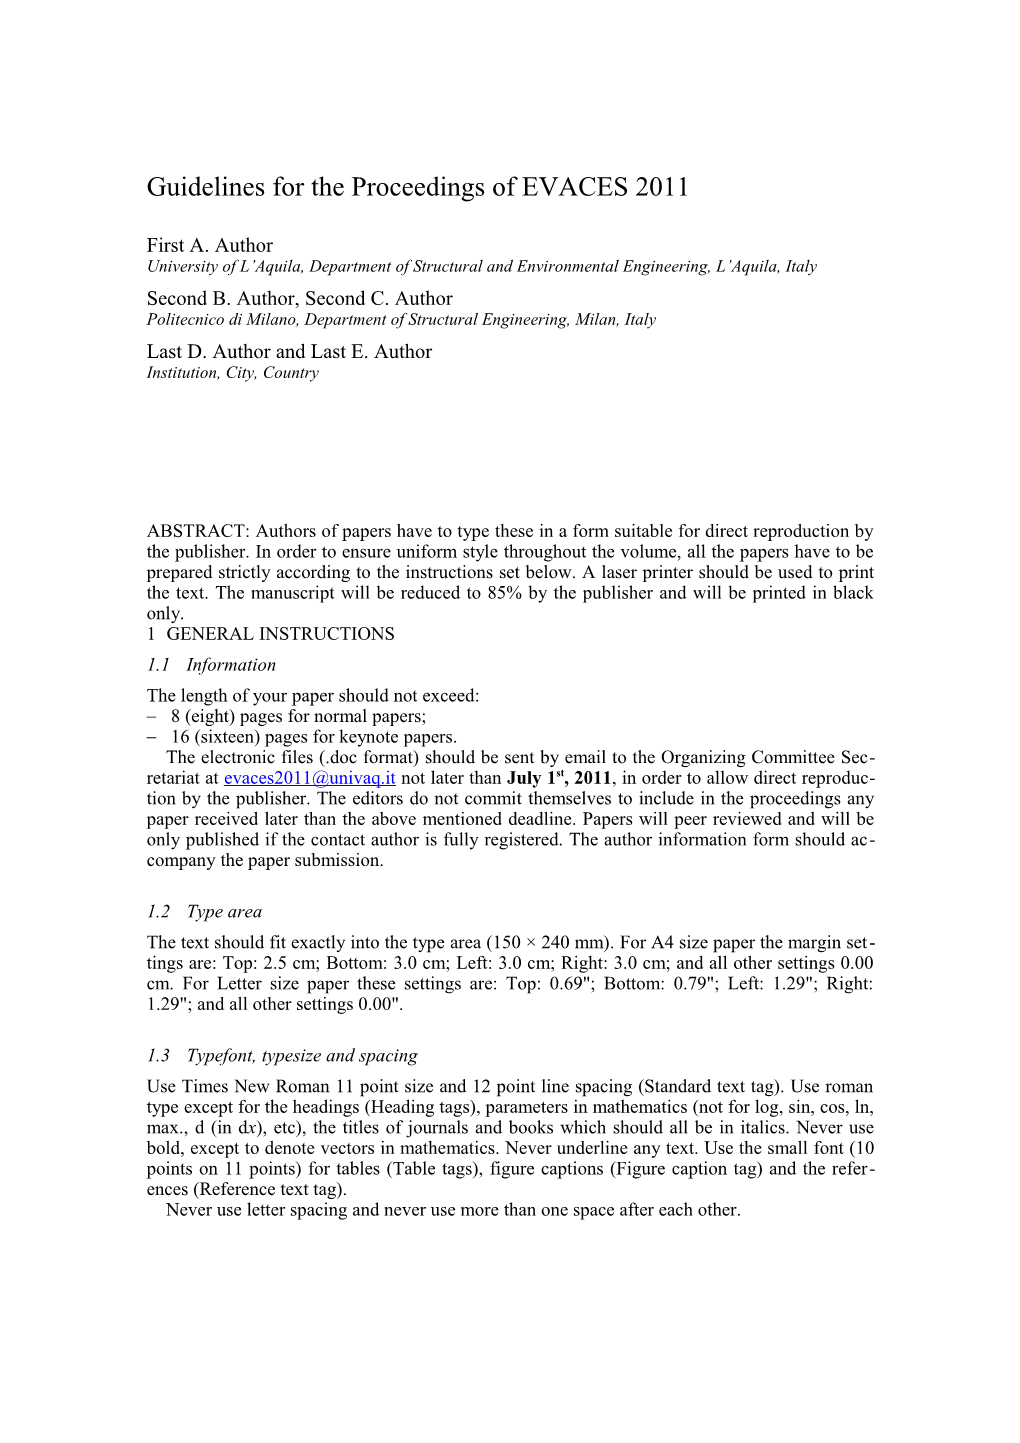 Guidelines for the Proceedings of EVACES 2011